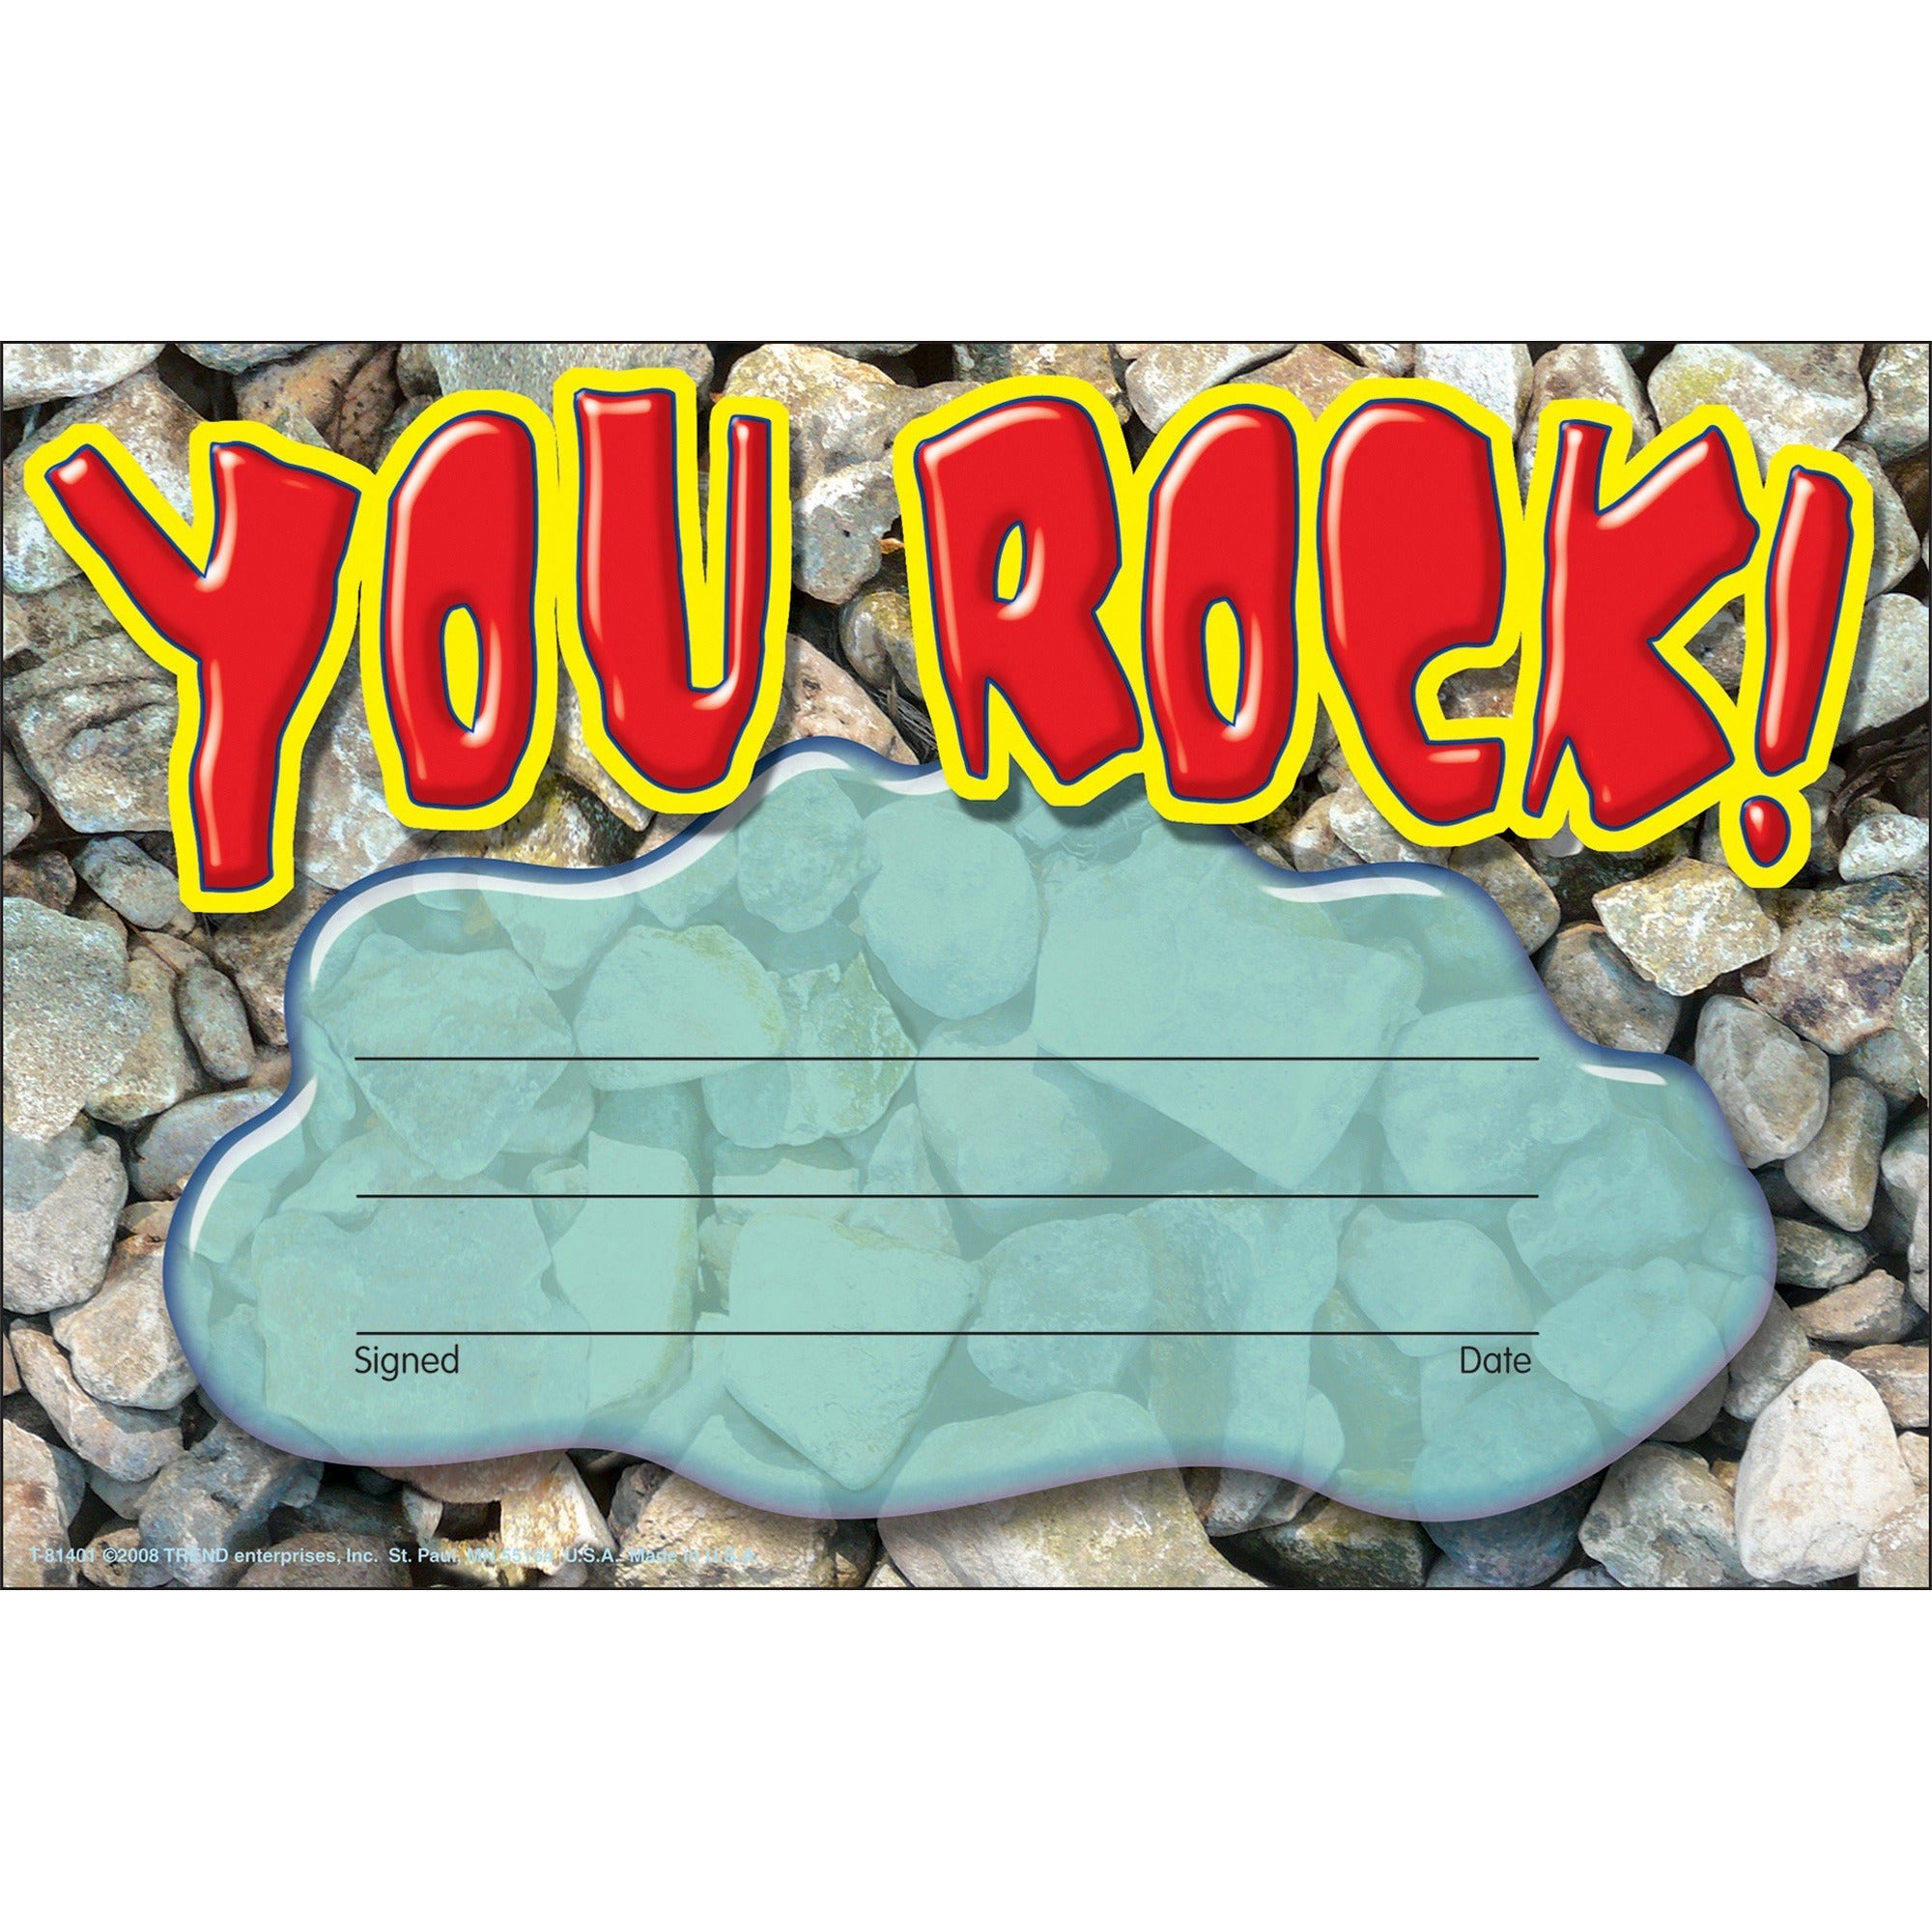 Trend You Rock Colorful Recognition Awards - 8.5" x 5.5" - Multicolor - 1 / Pack - 